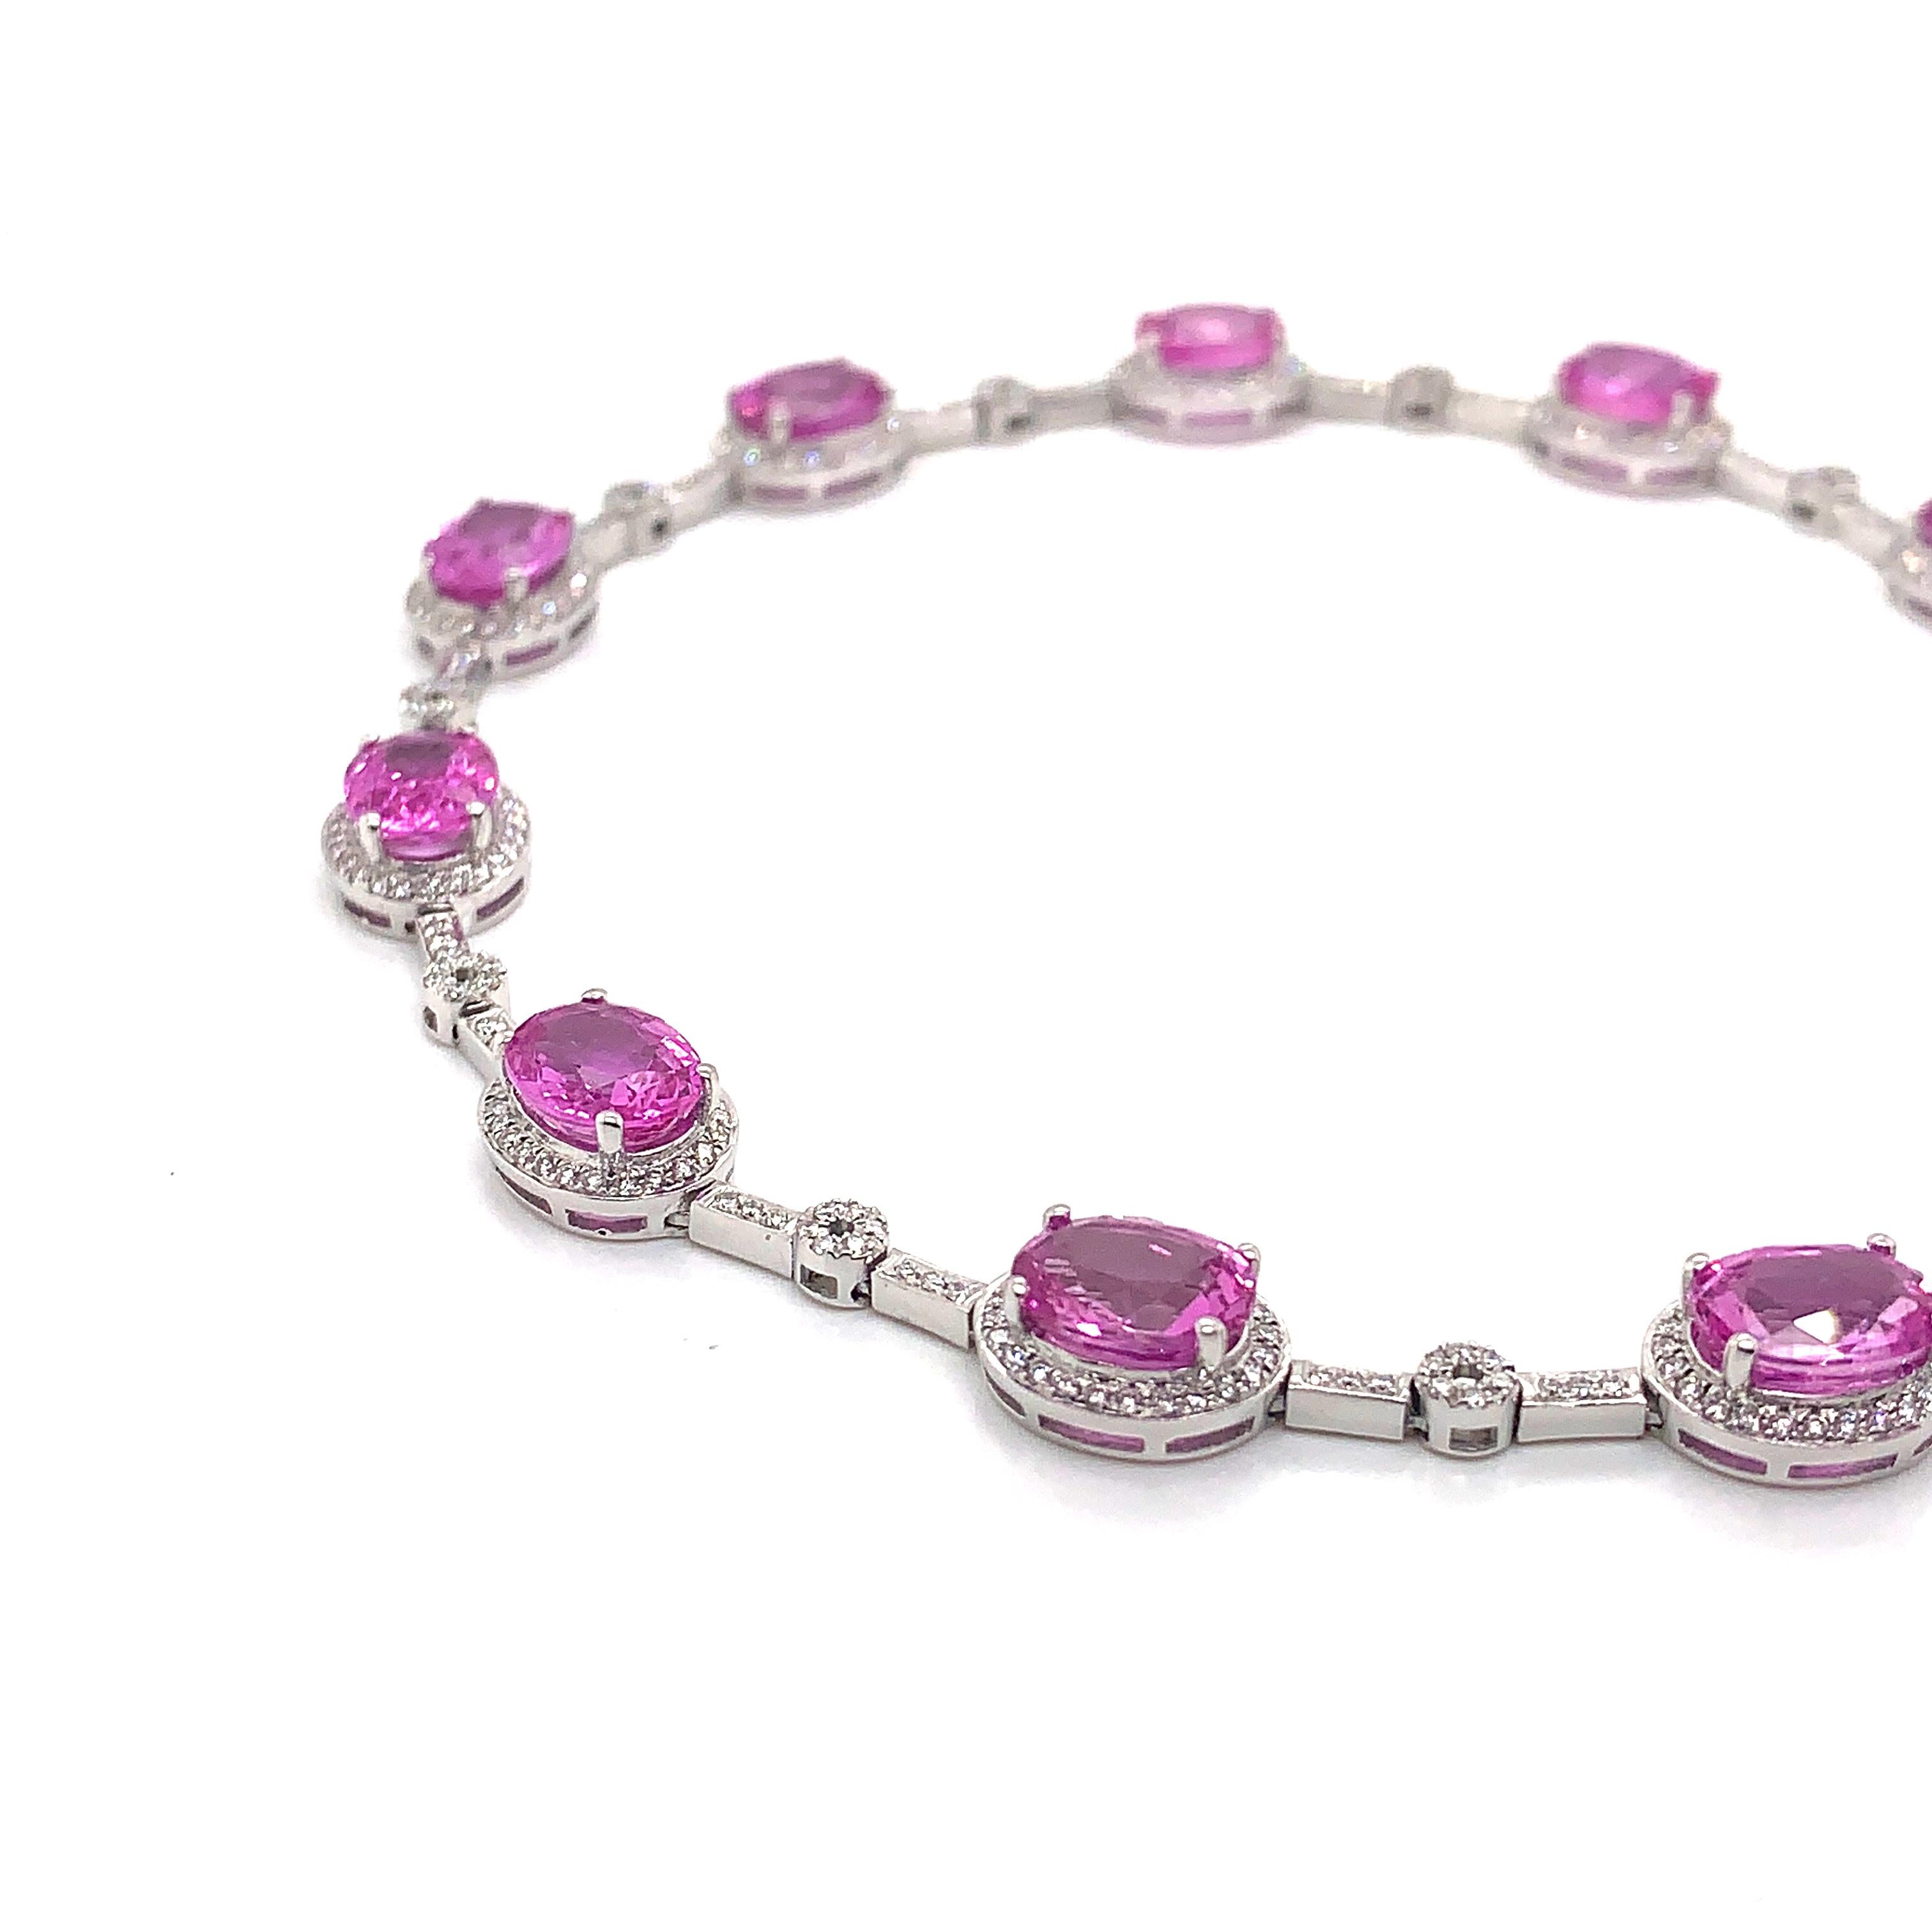 If you like to indulge in sweets, then you're definitely going to fall in love with these candy like 'jelly-bean' sapphires! This particular necklace showcases dazzling pink sapphires that are almost candy like! 

Designer pink sapphire necklace in